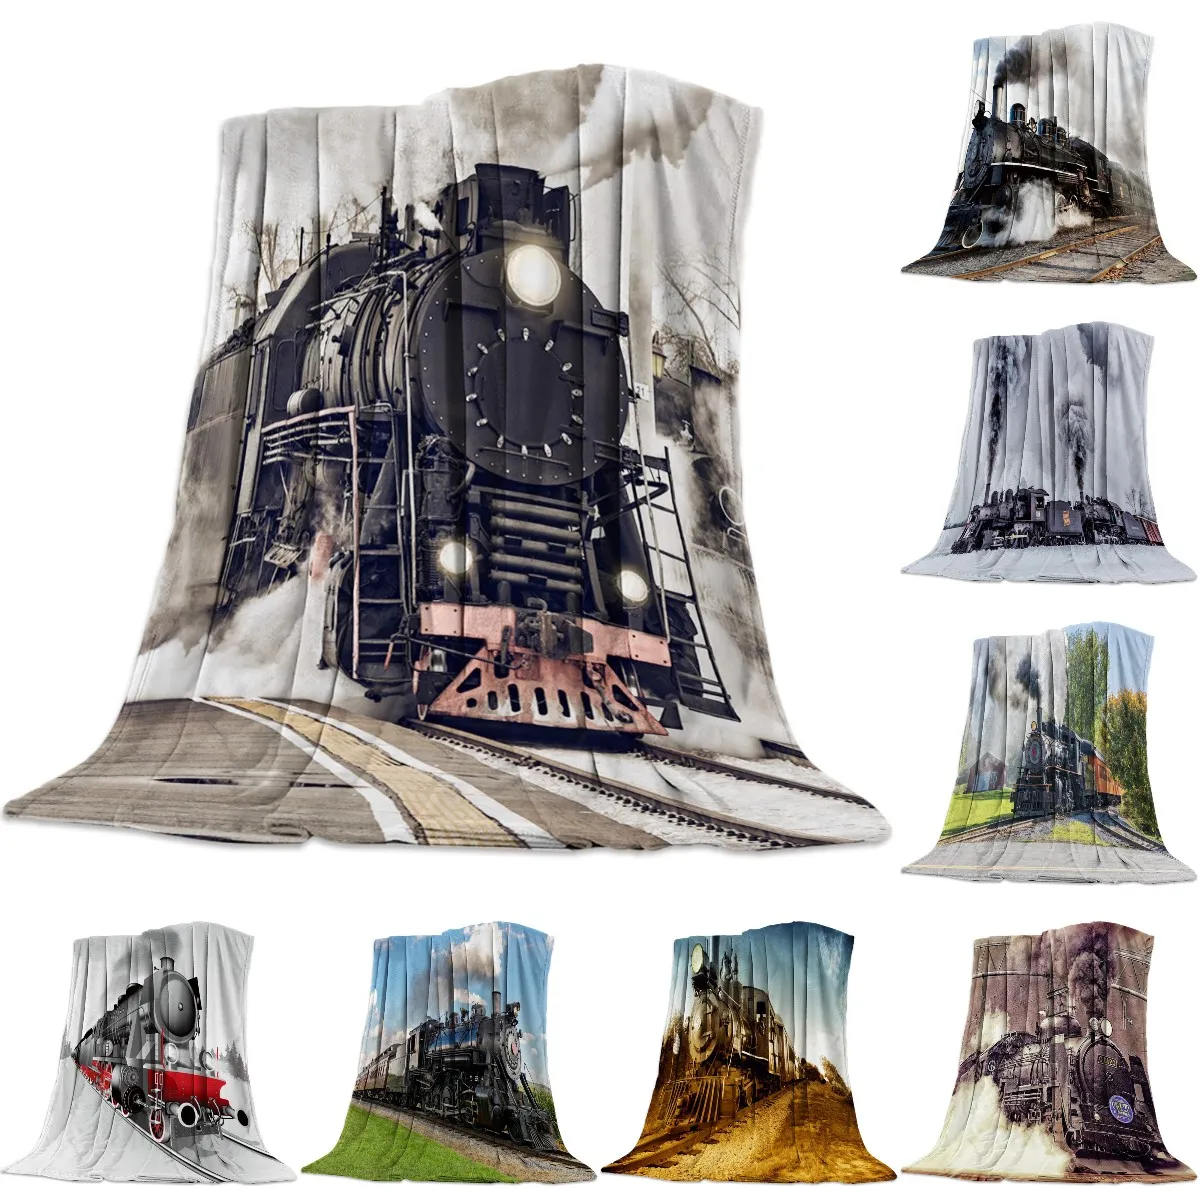 

Flannel Blankets The Steam Age Of Old Trains Blanket Cushion Warm Throws on Sofa Bed Home Bedspread Travel Fleece Blanket Queen